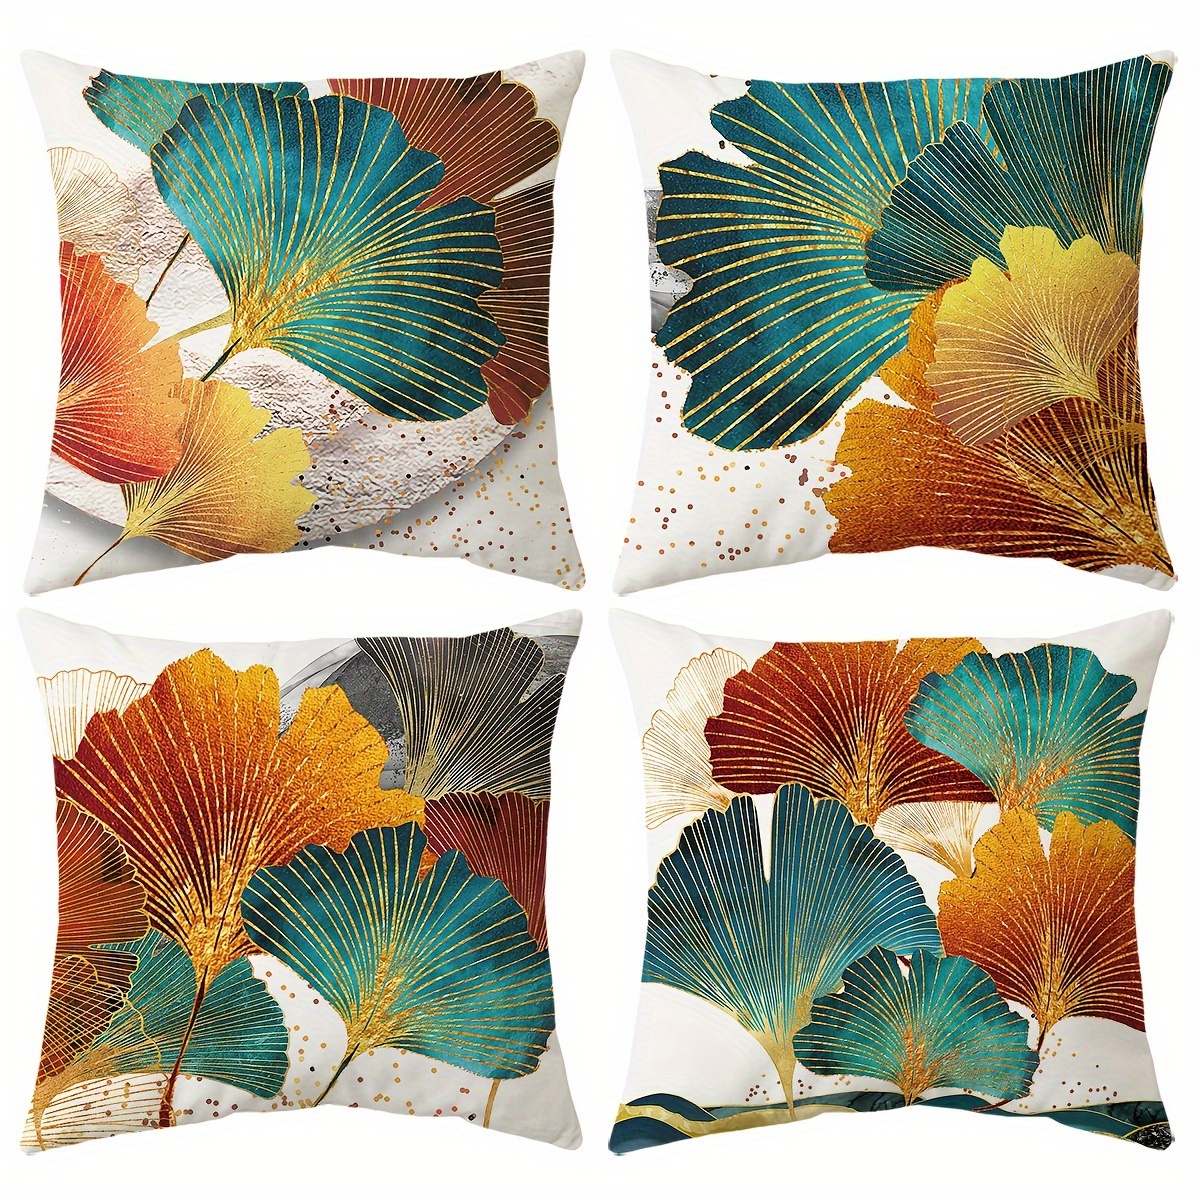 

4pcs Ginkgo Leaves Throw Pillow Covers, 18*18inch Abstract Modern Art Decorations Cushion Cases Home Decor For Porch Patio Couch Sofa Living Room Outdoor, Farmhouse Style, Without Pillow Inserts